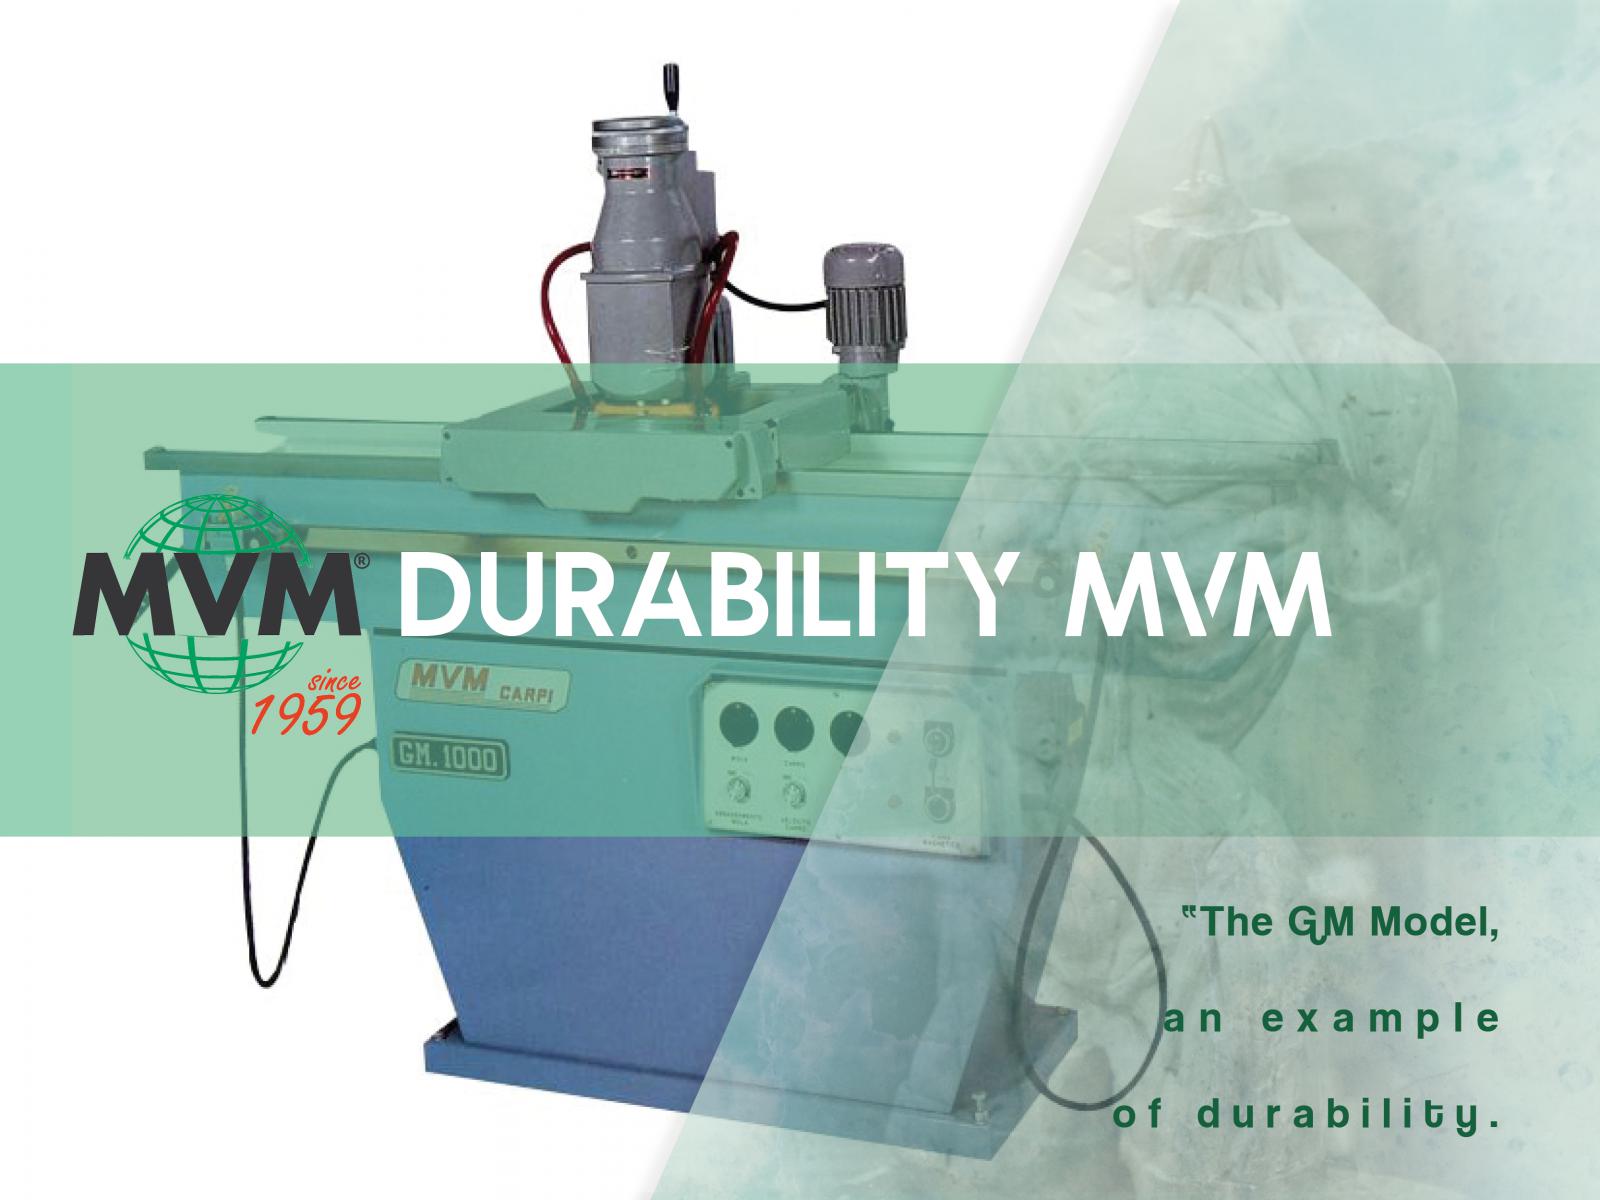 MVM machinery: Robust, Solid, Durable 